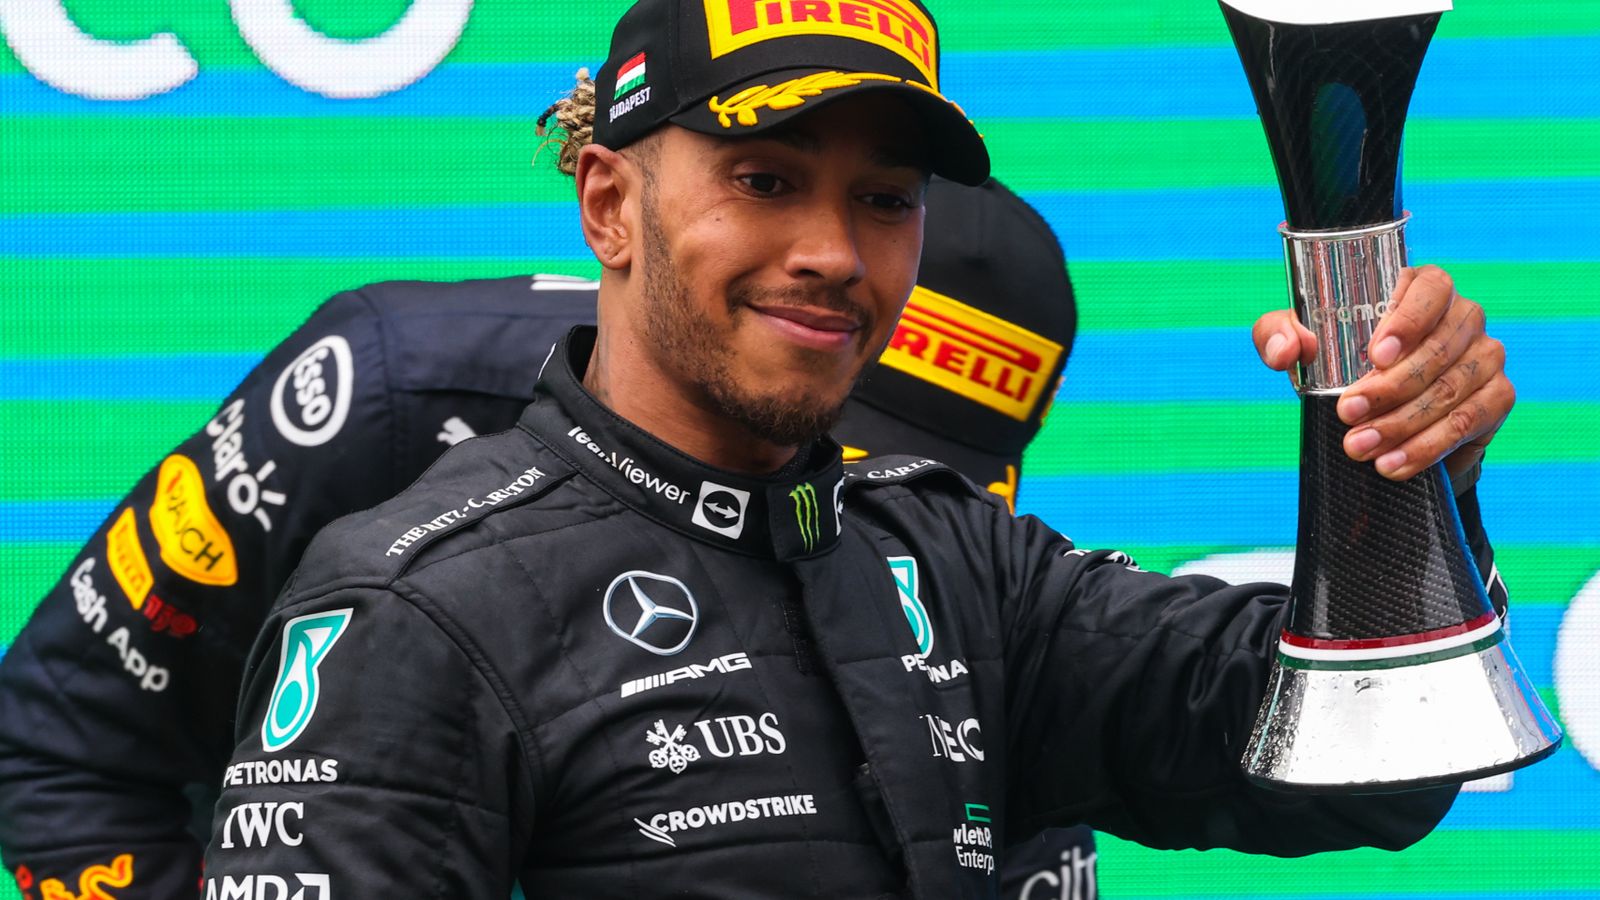 Hungarian GP: Lewis Hamilton rues missed win chance but warns rivals that Mercedes are closing the gap